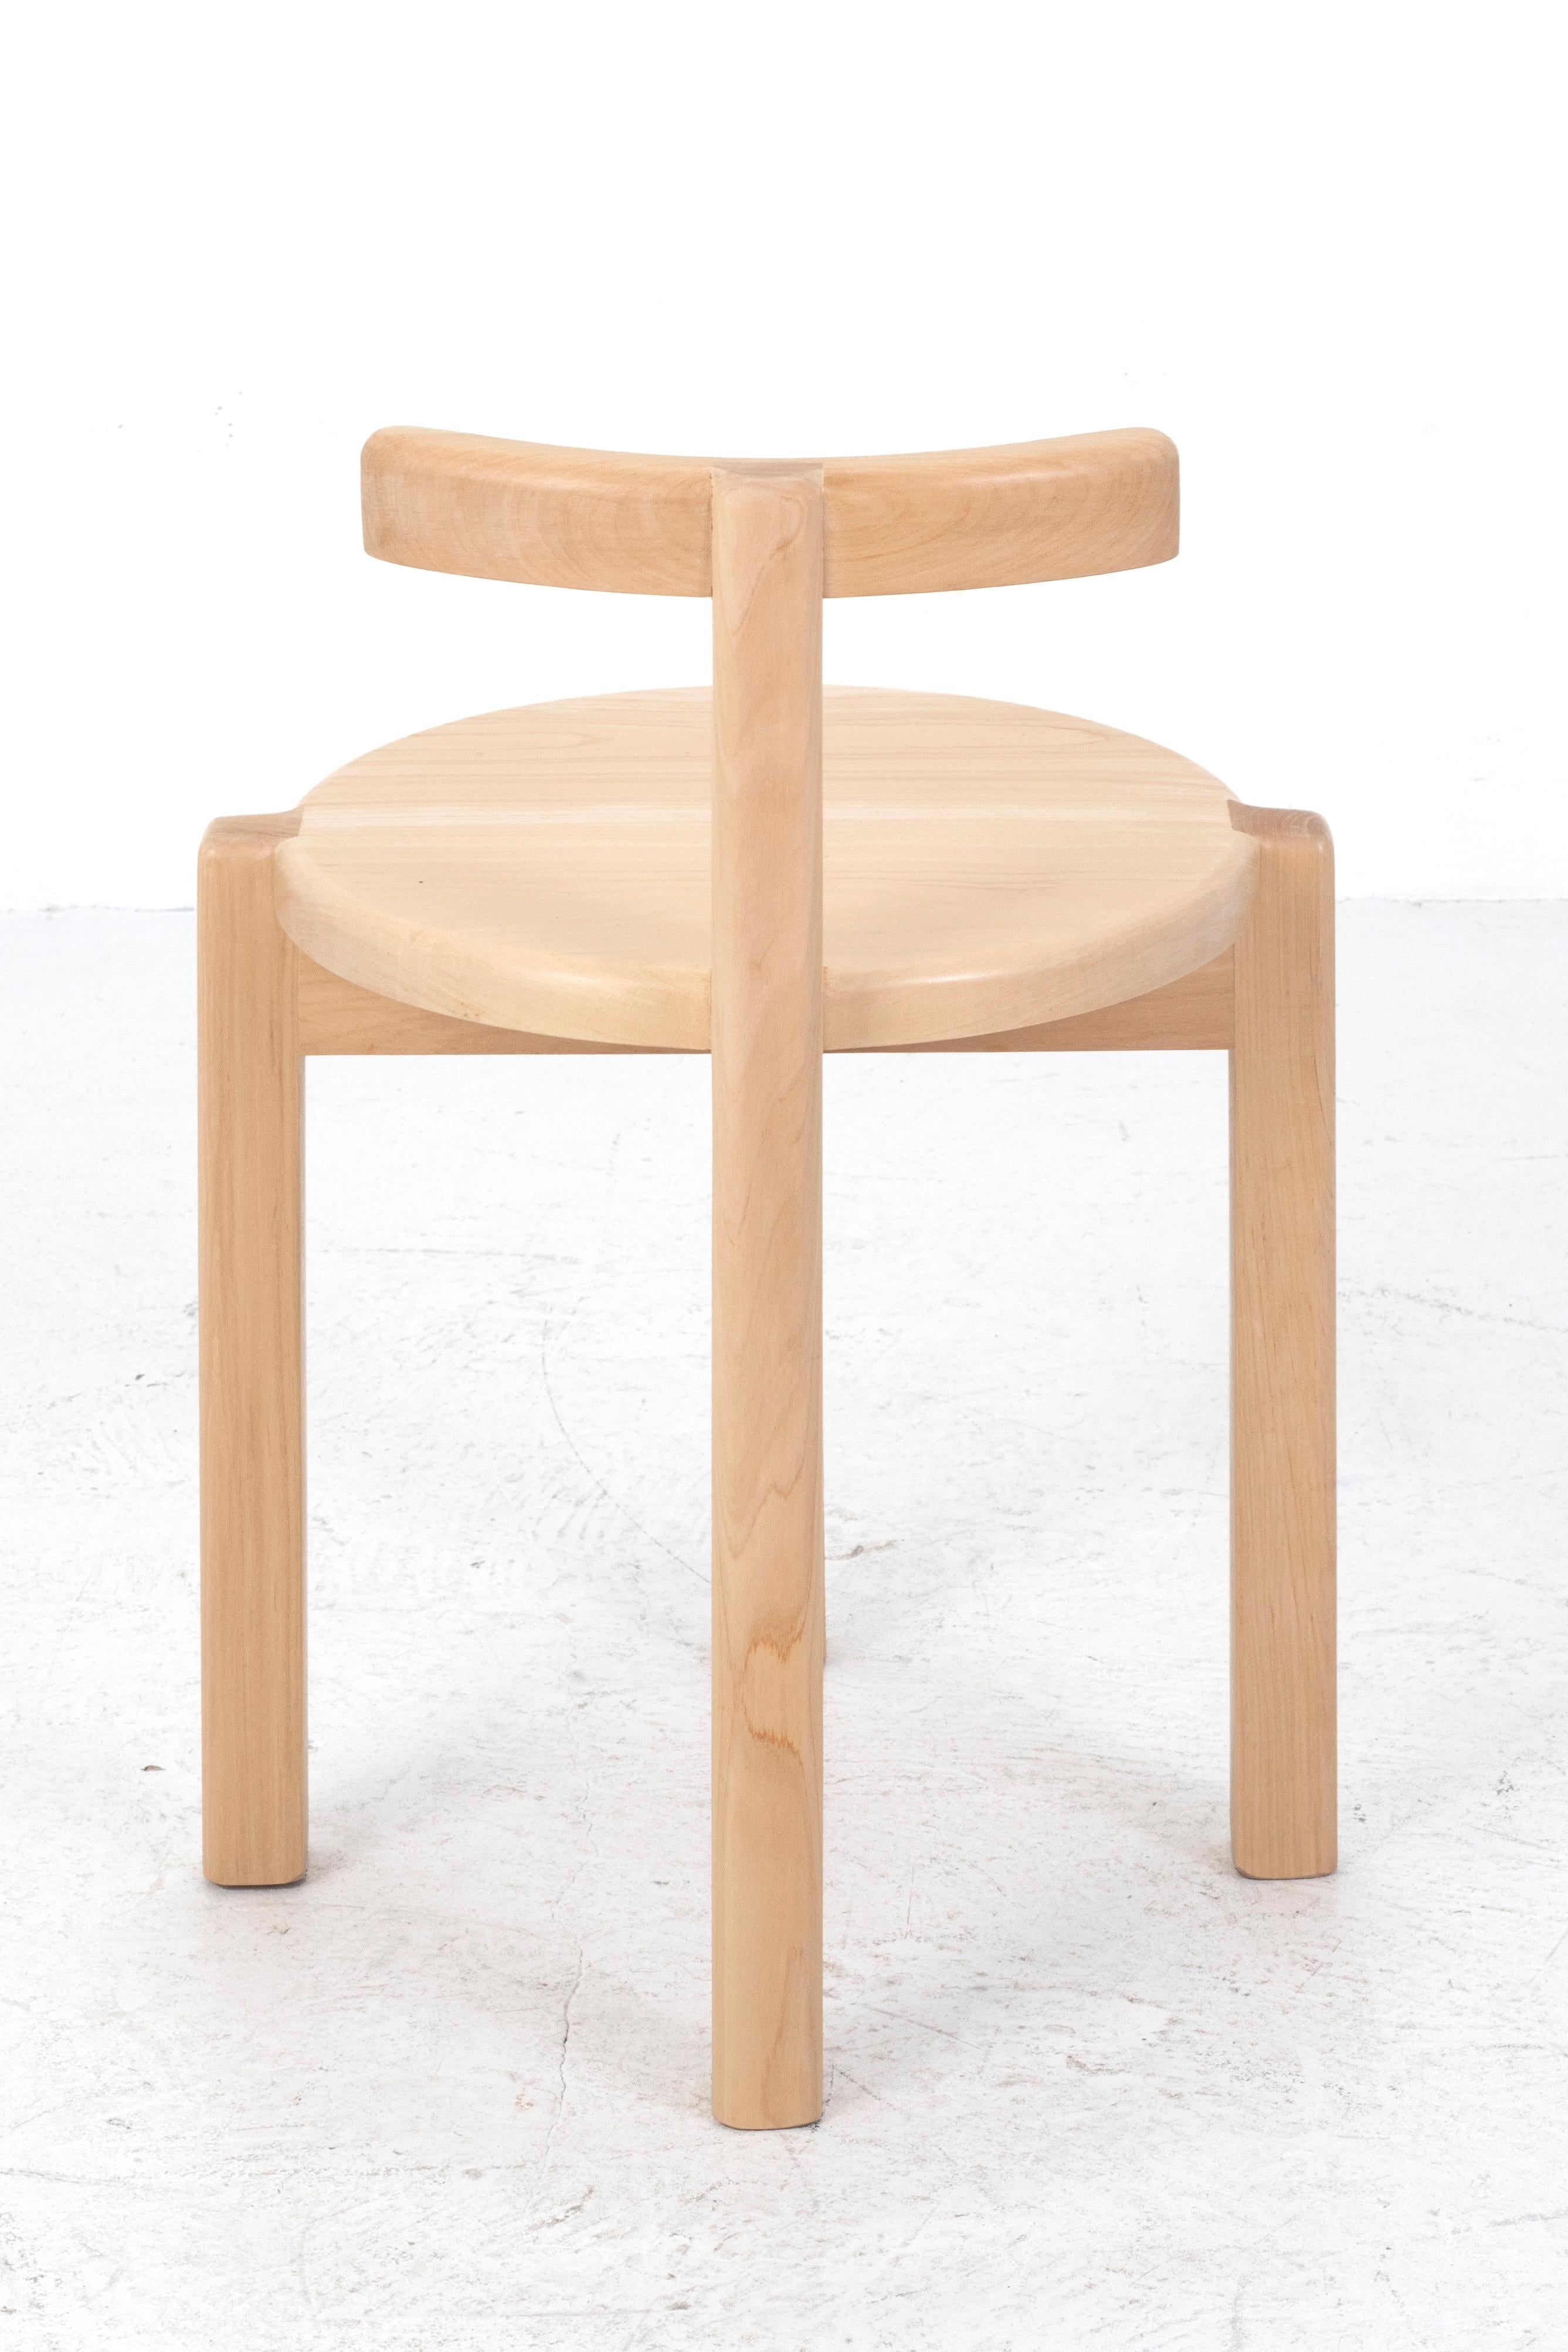 Contemporary Set of 2 Orno Chairs by Ries